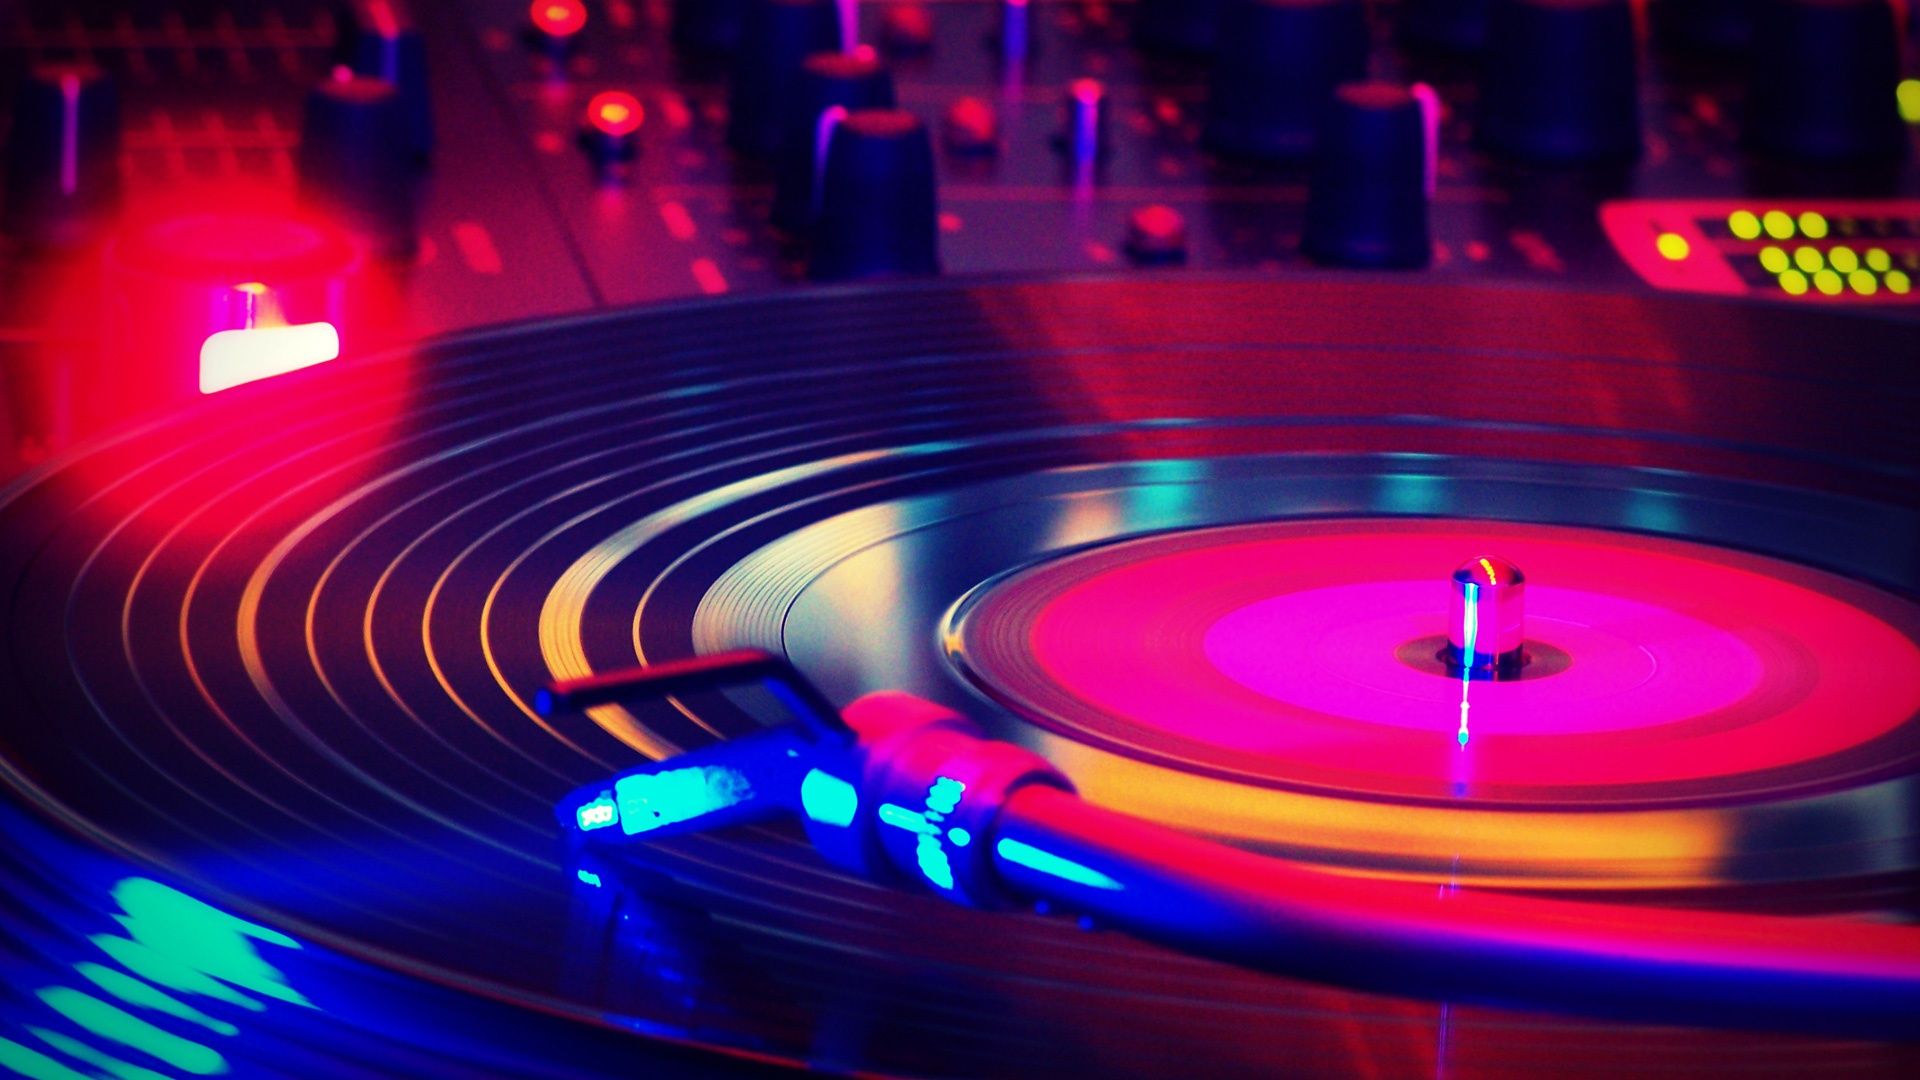 1920x1080 disco vinyl nights colorful turntable record spinning